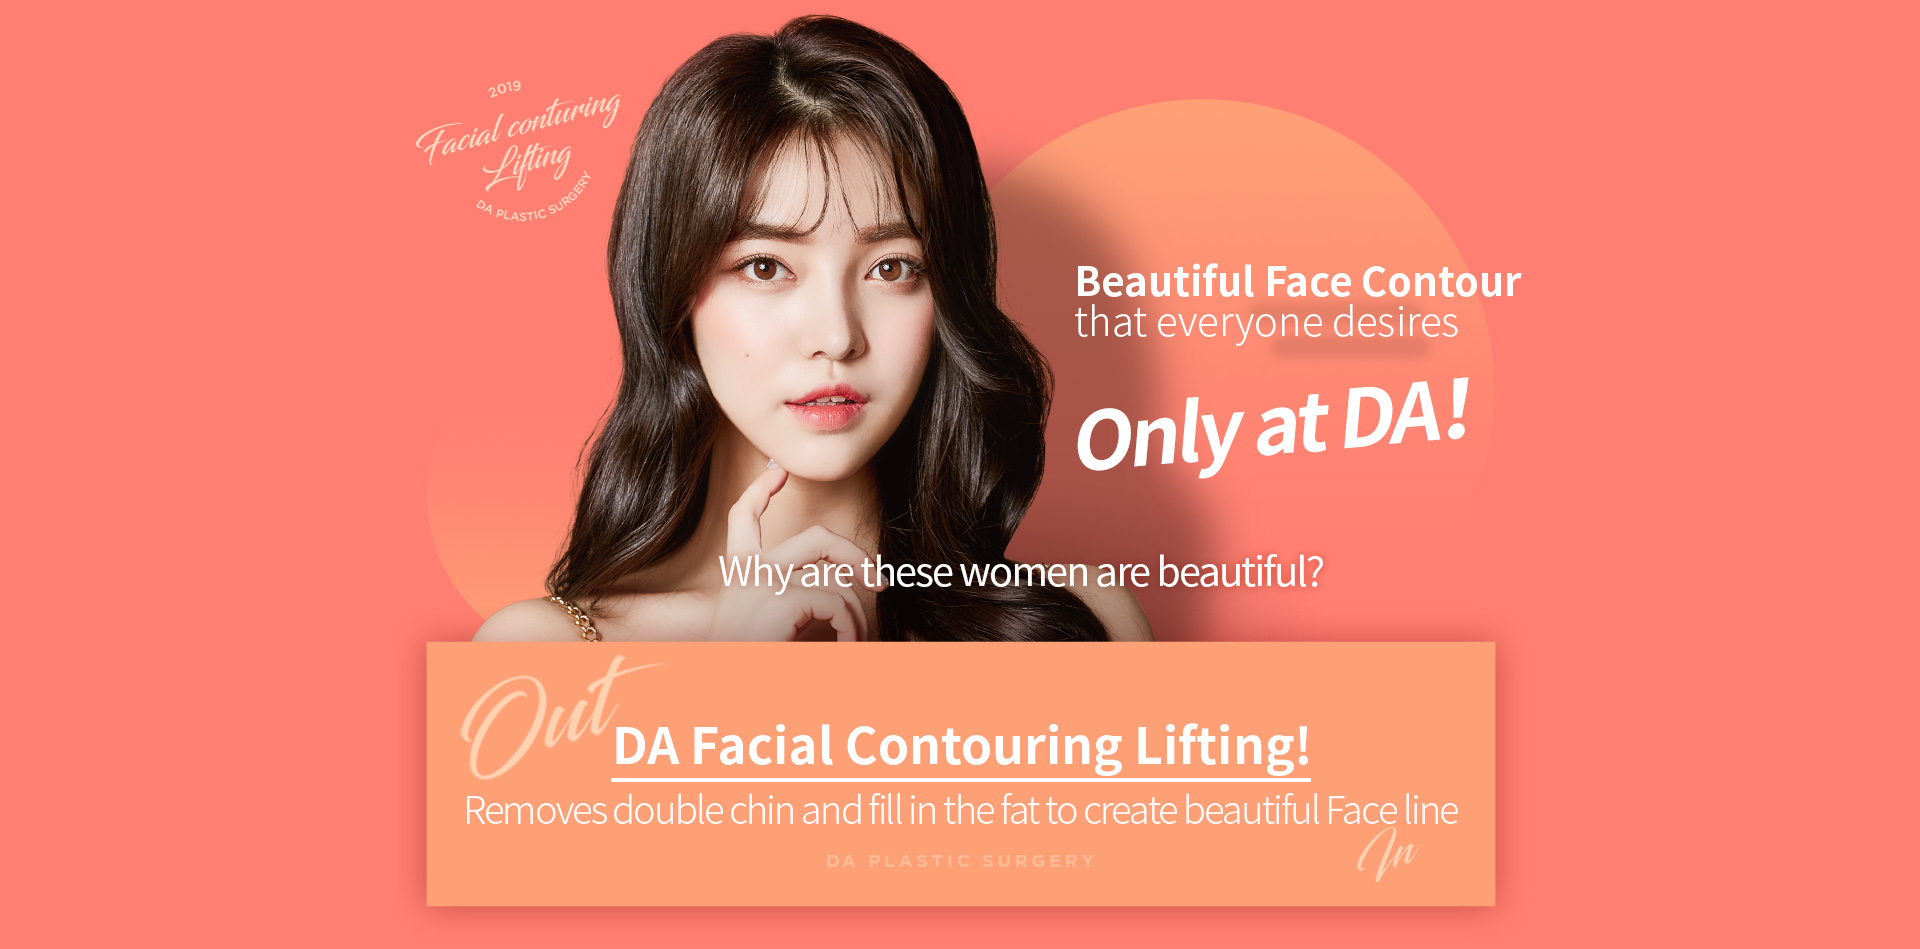 DA Facial Contouring Lifting! Removes double chin and fill in the fat to create beautiful Face line